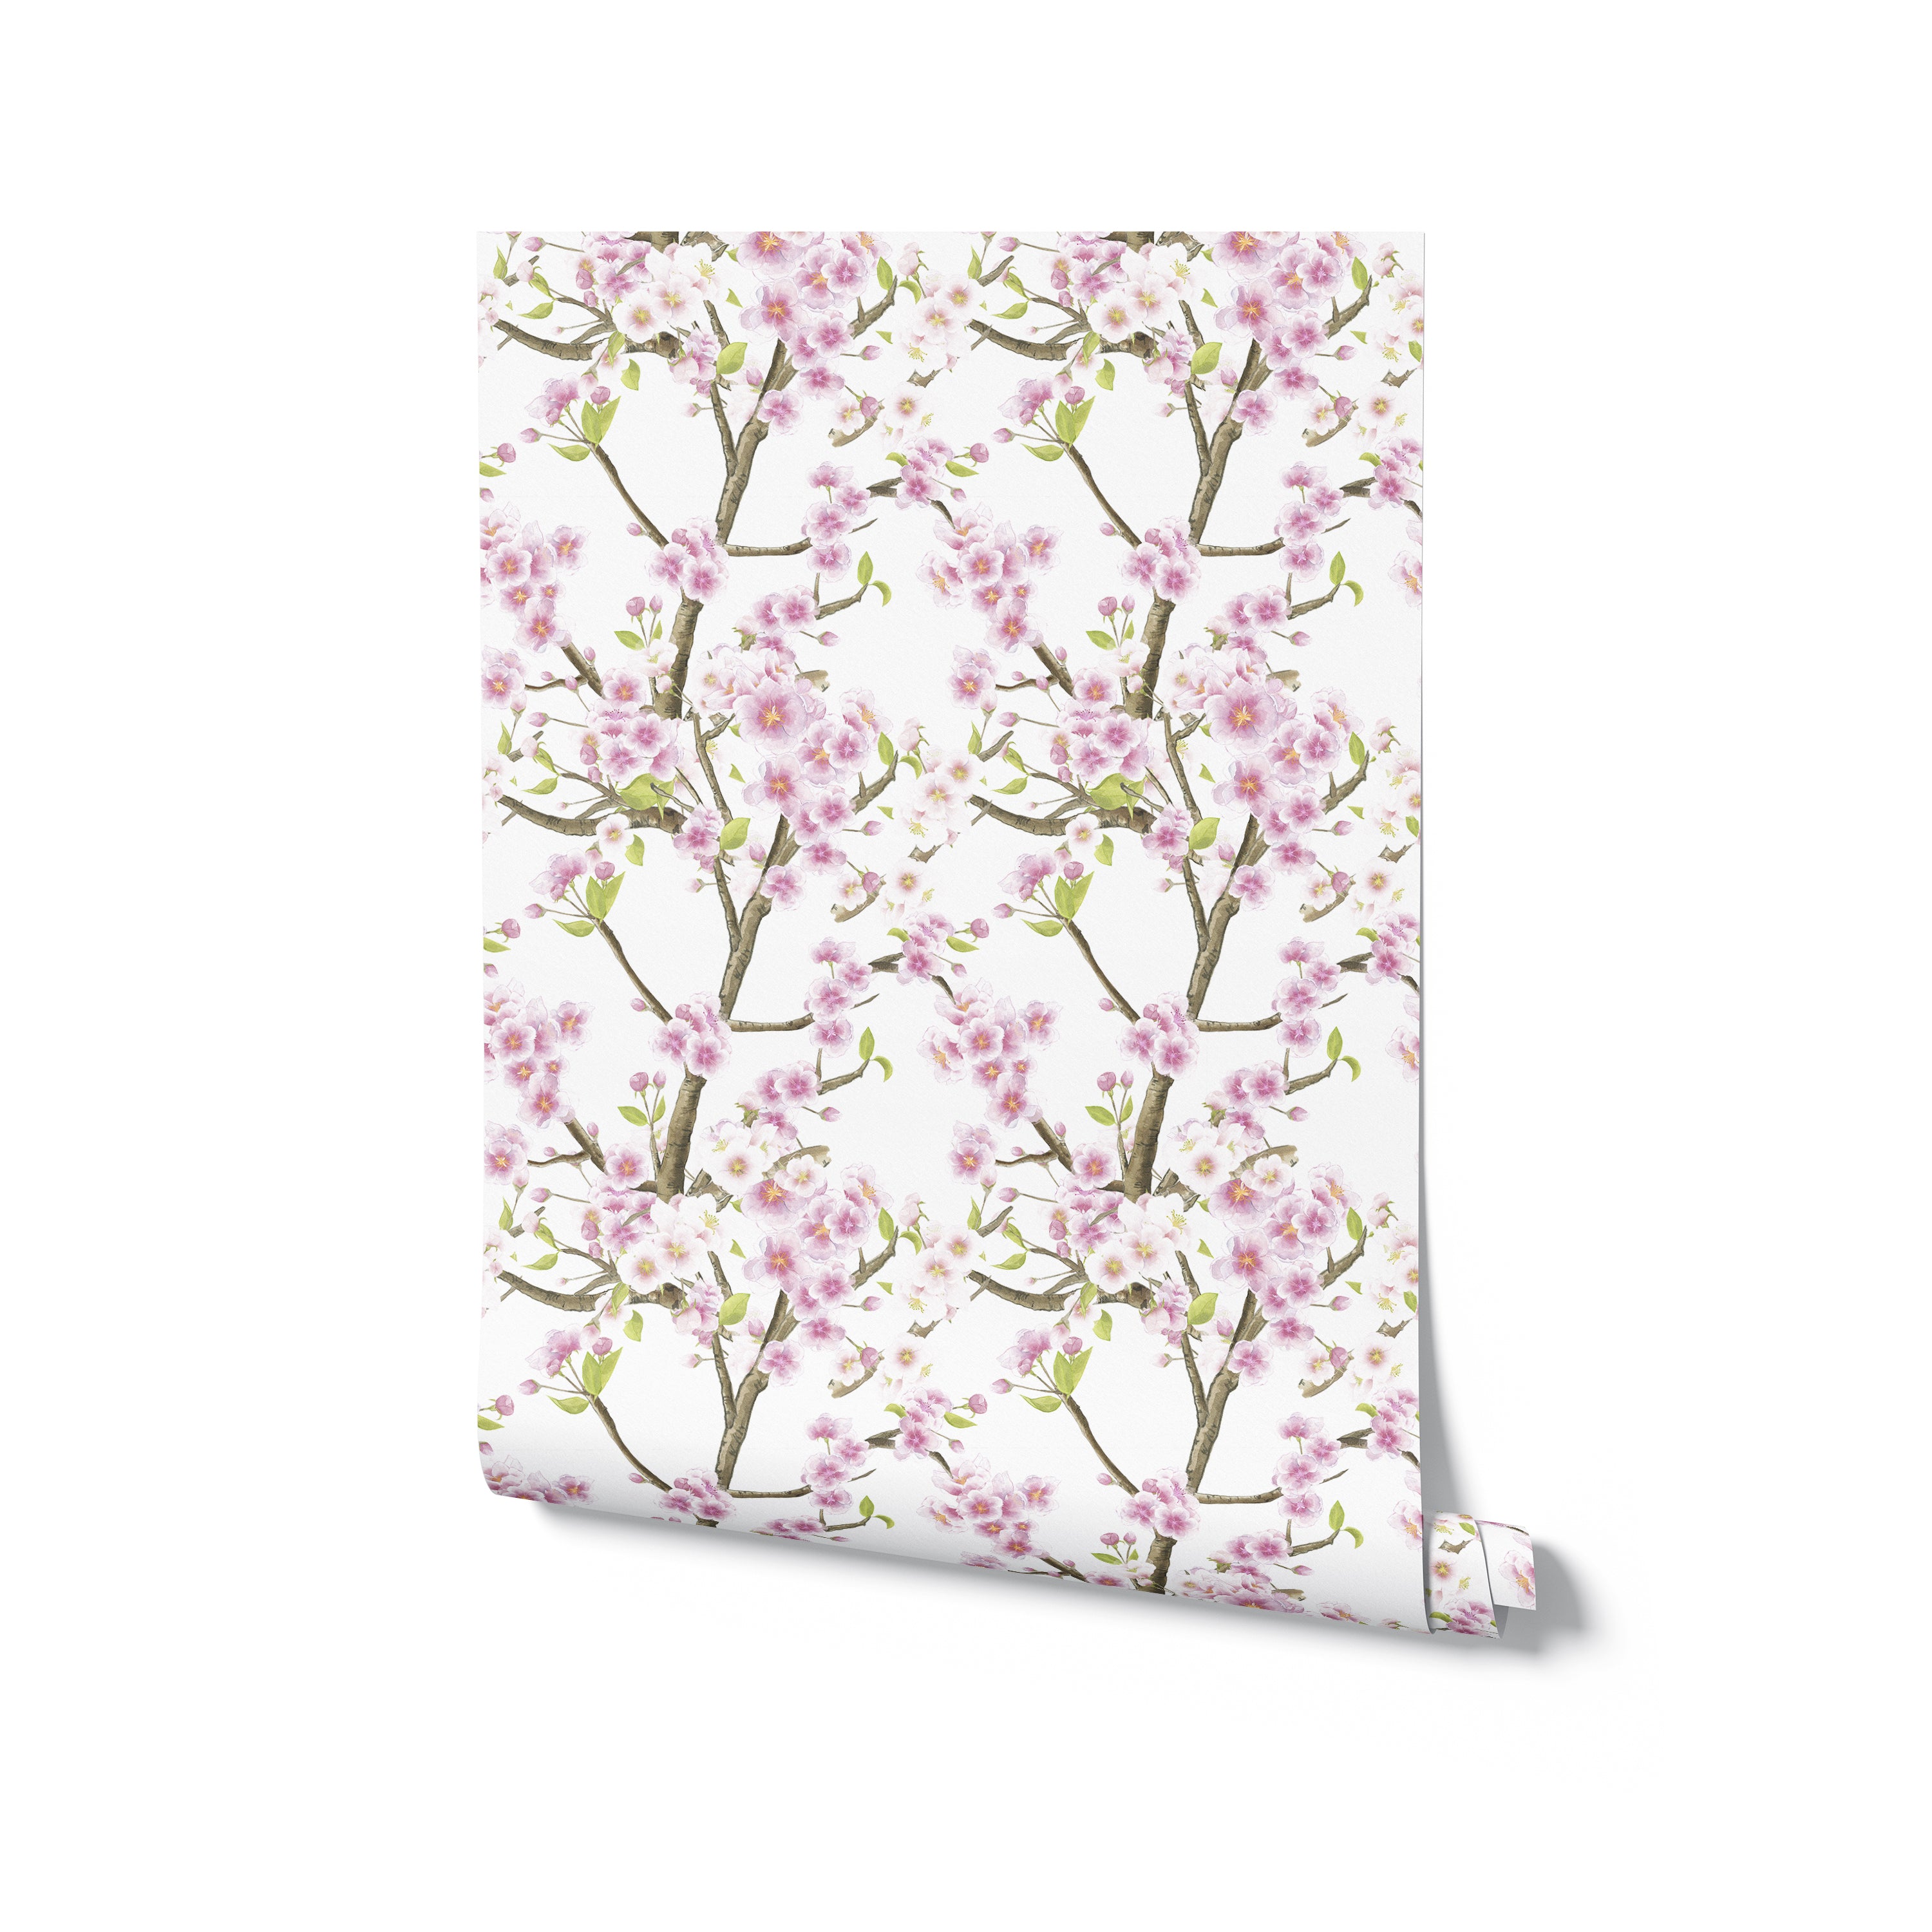 Rolled sample of Sakura Blossom Wallpaper displaying a lush pattern of pink sakura flowers and green foliage on white, perfect for bringing a touch of spring and elegance to any room with its detailed floral design